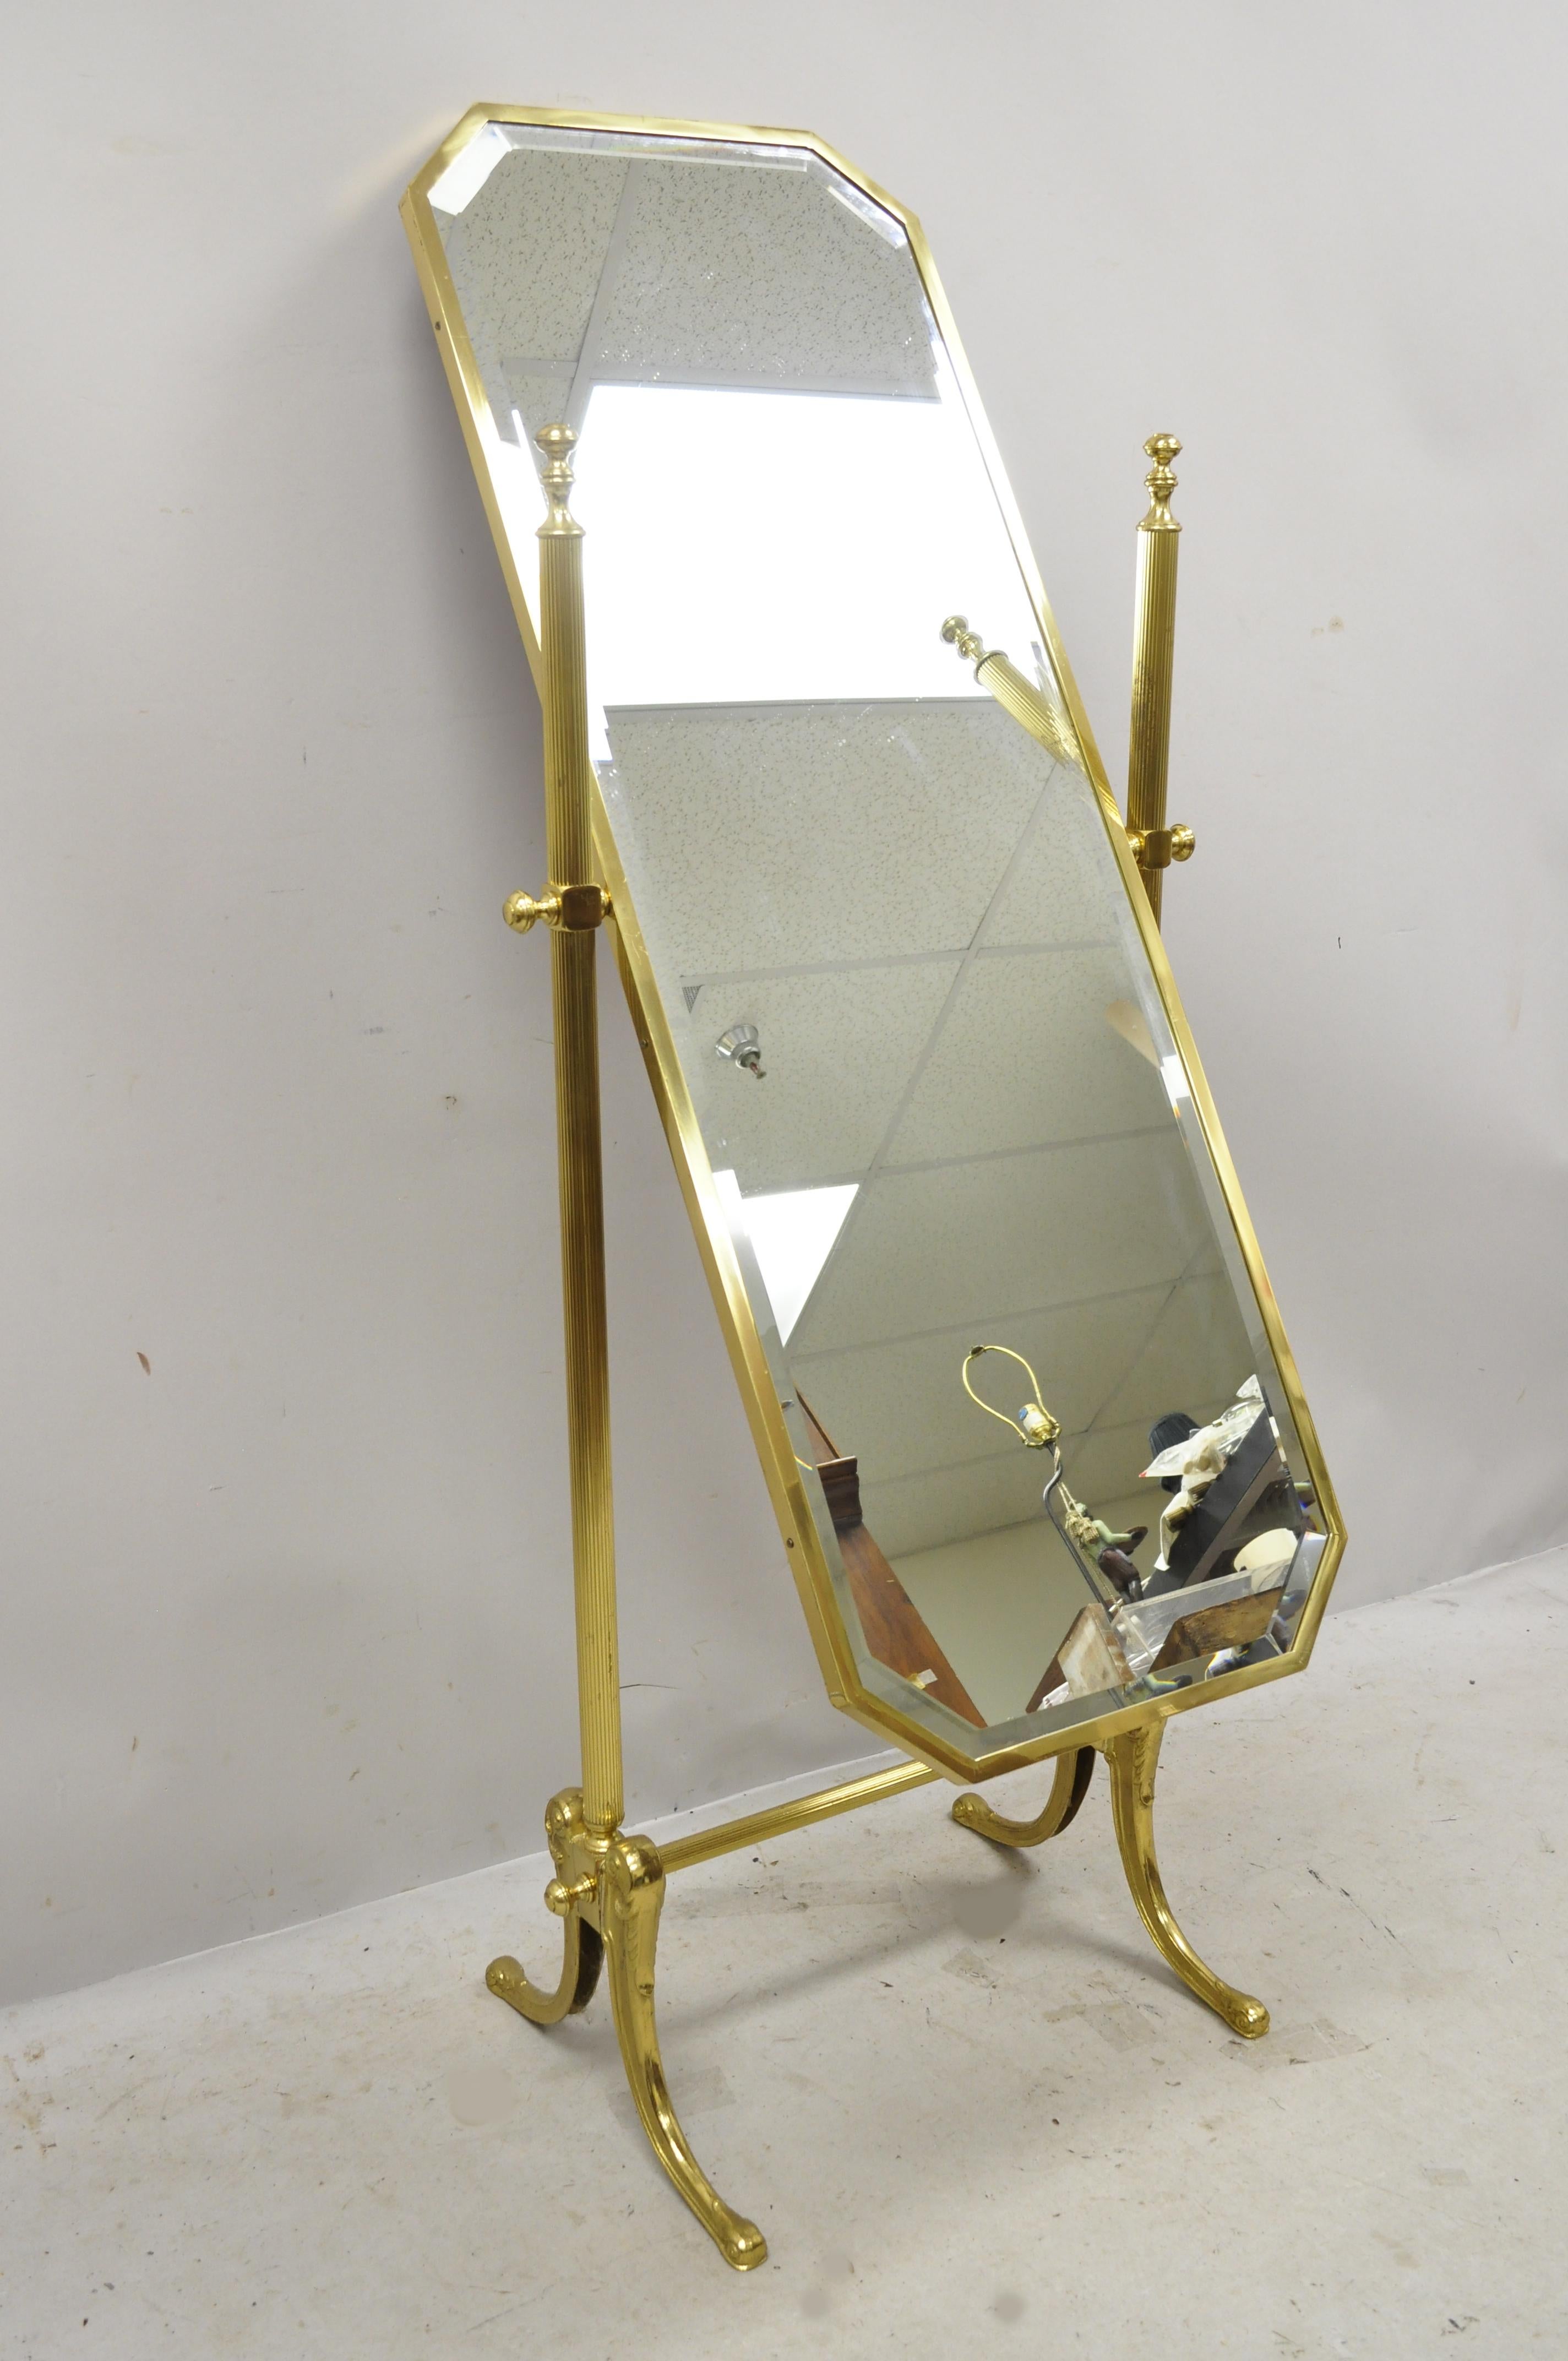 Vintage brass Italian neoclassical cheval standing dressing floor beveled mirror. Item features a beveled glass mirror, brass construction, tapered legs, very nice vintage item, great style and form, circa mid-20th century. Measurements: 61.5